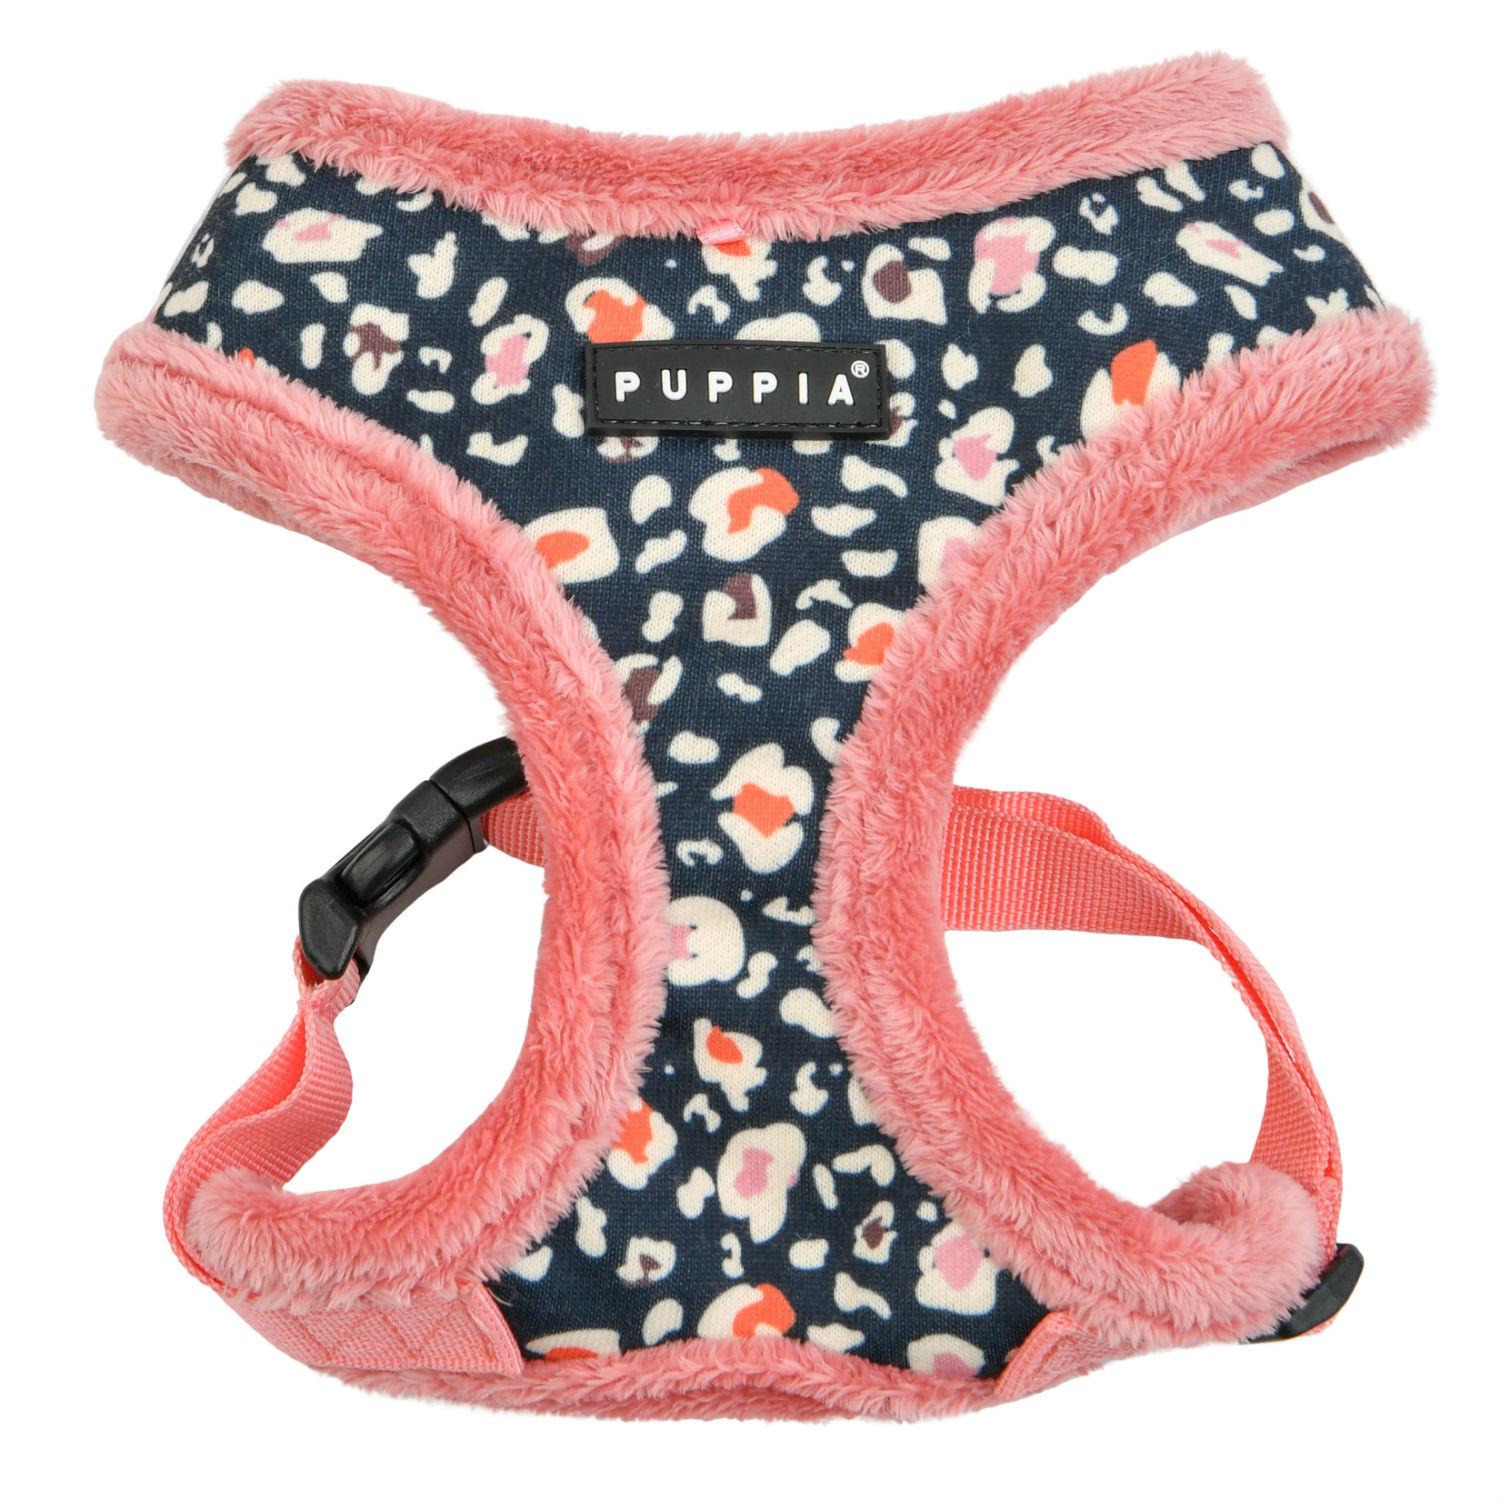 Elyse Basic Style Dog Harness By Puppia - Indian Pink